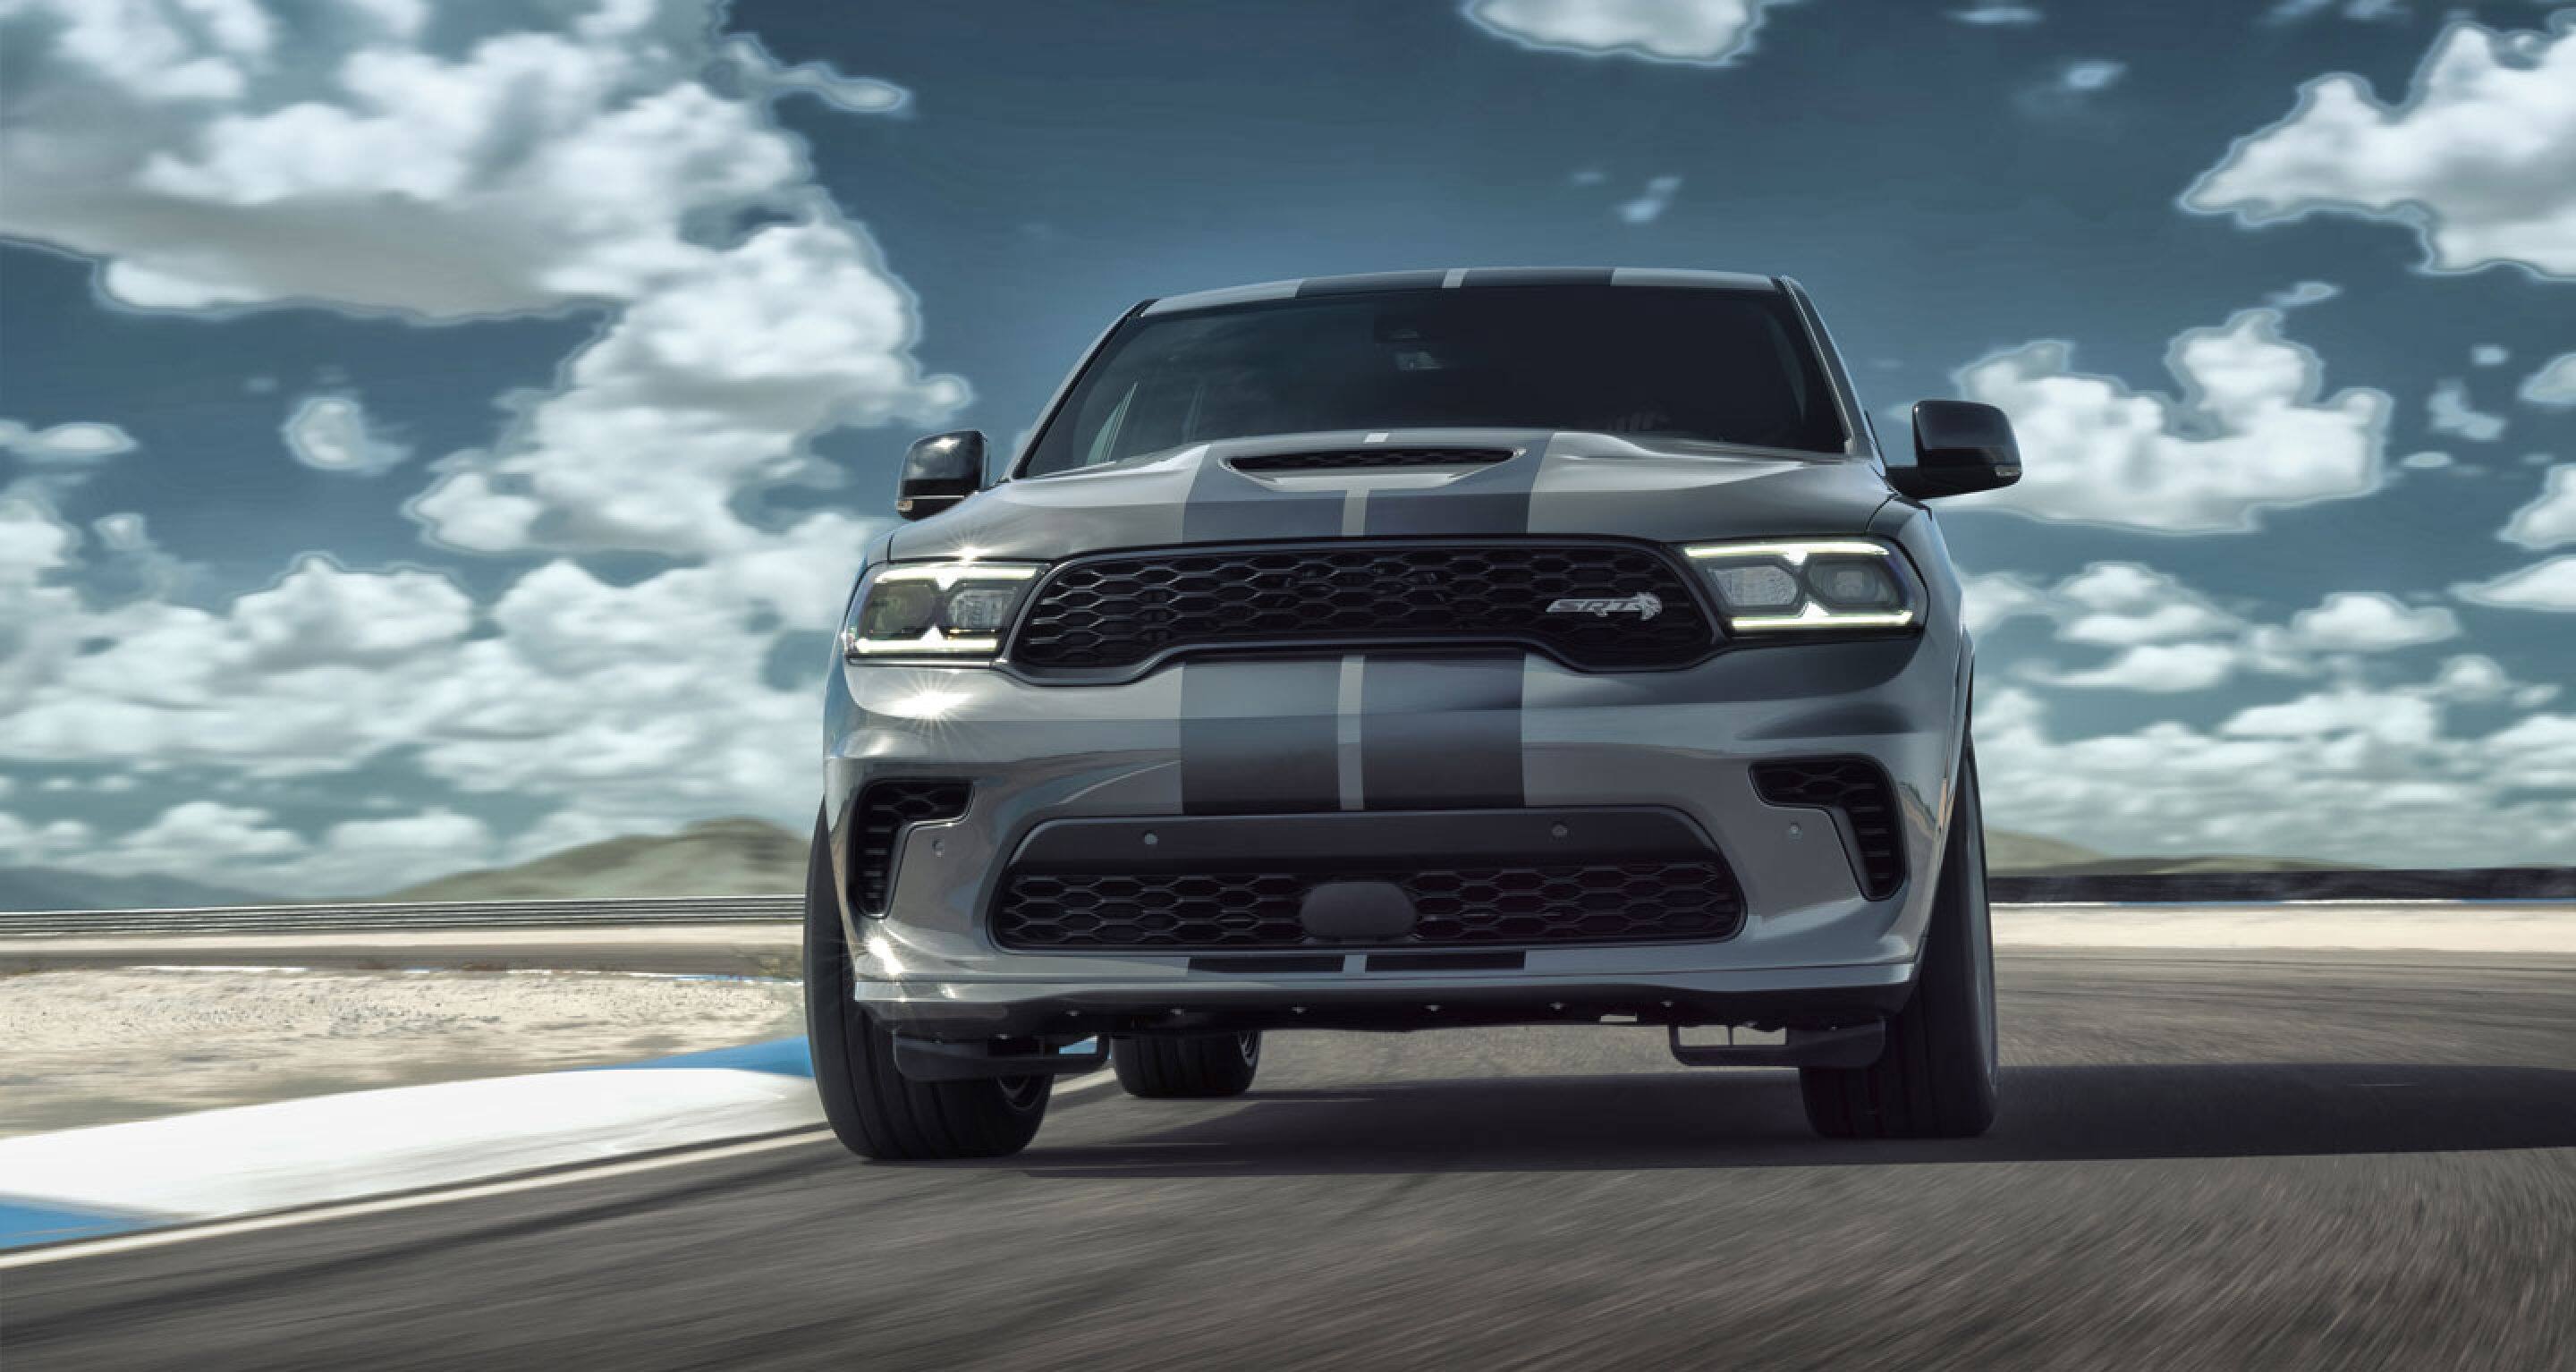 A gray 2021 Dodge Durango against a cloudy background.